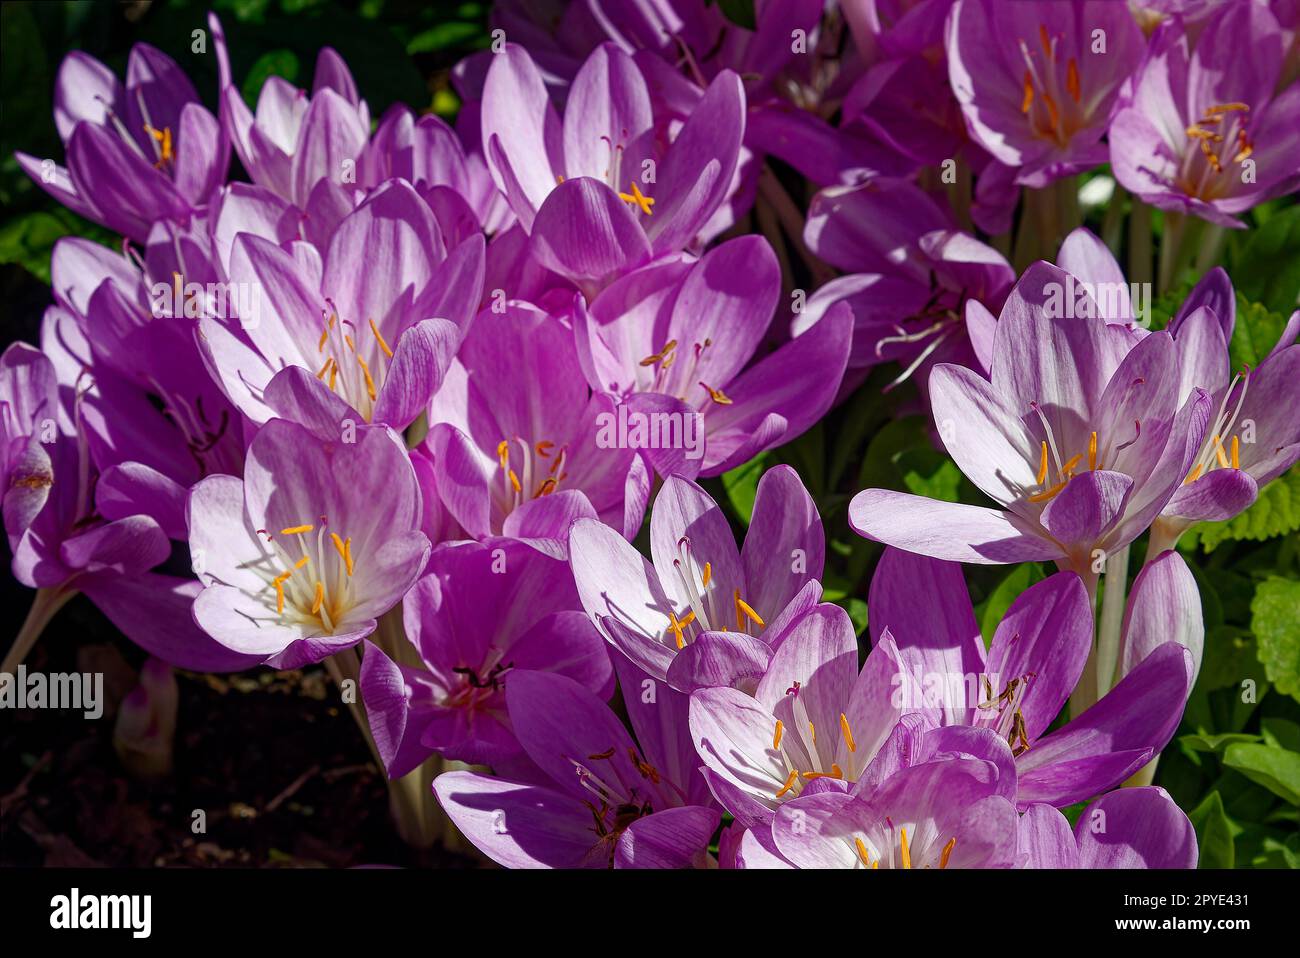 purple crocuses, group, close-up, from bulbs, cultivated flower, small, Iridaceae family, seasonal, Pennsylvania; Chester County, PA; autumn Stock Photo